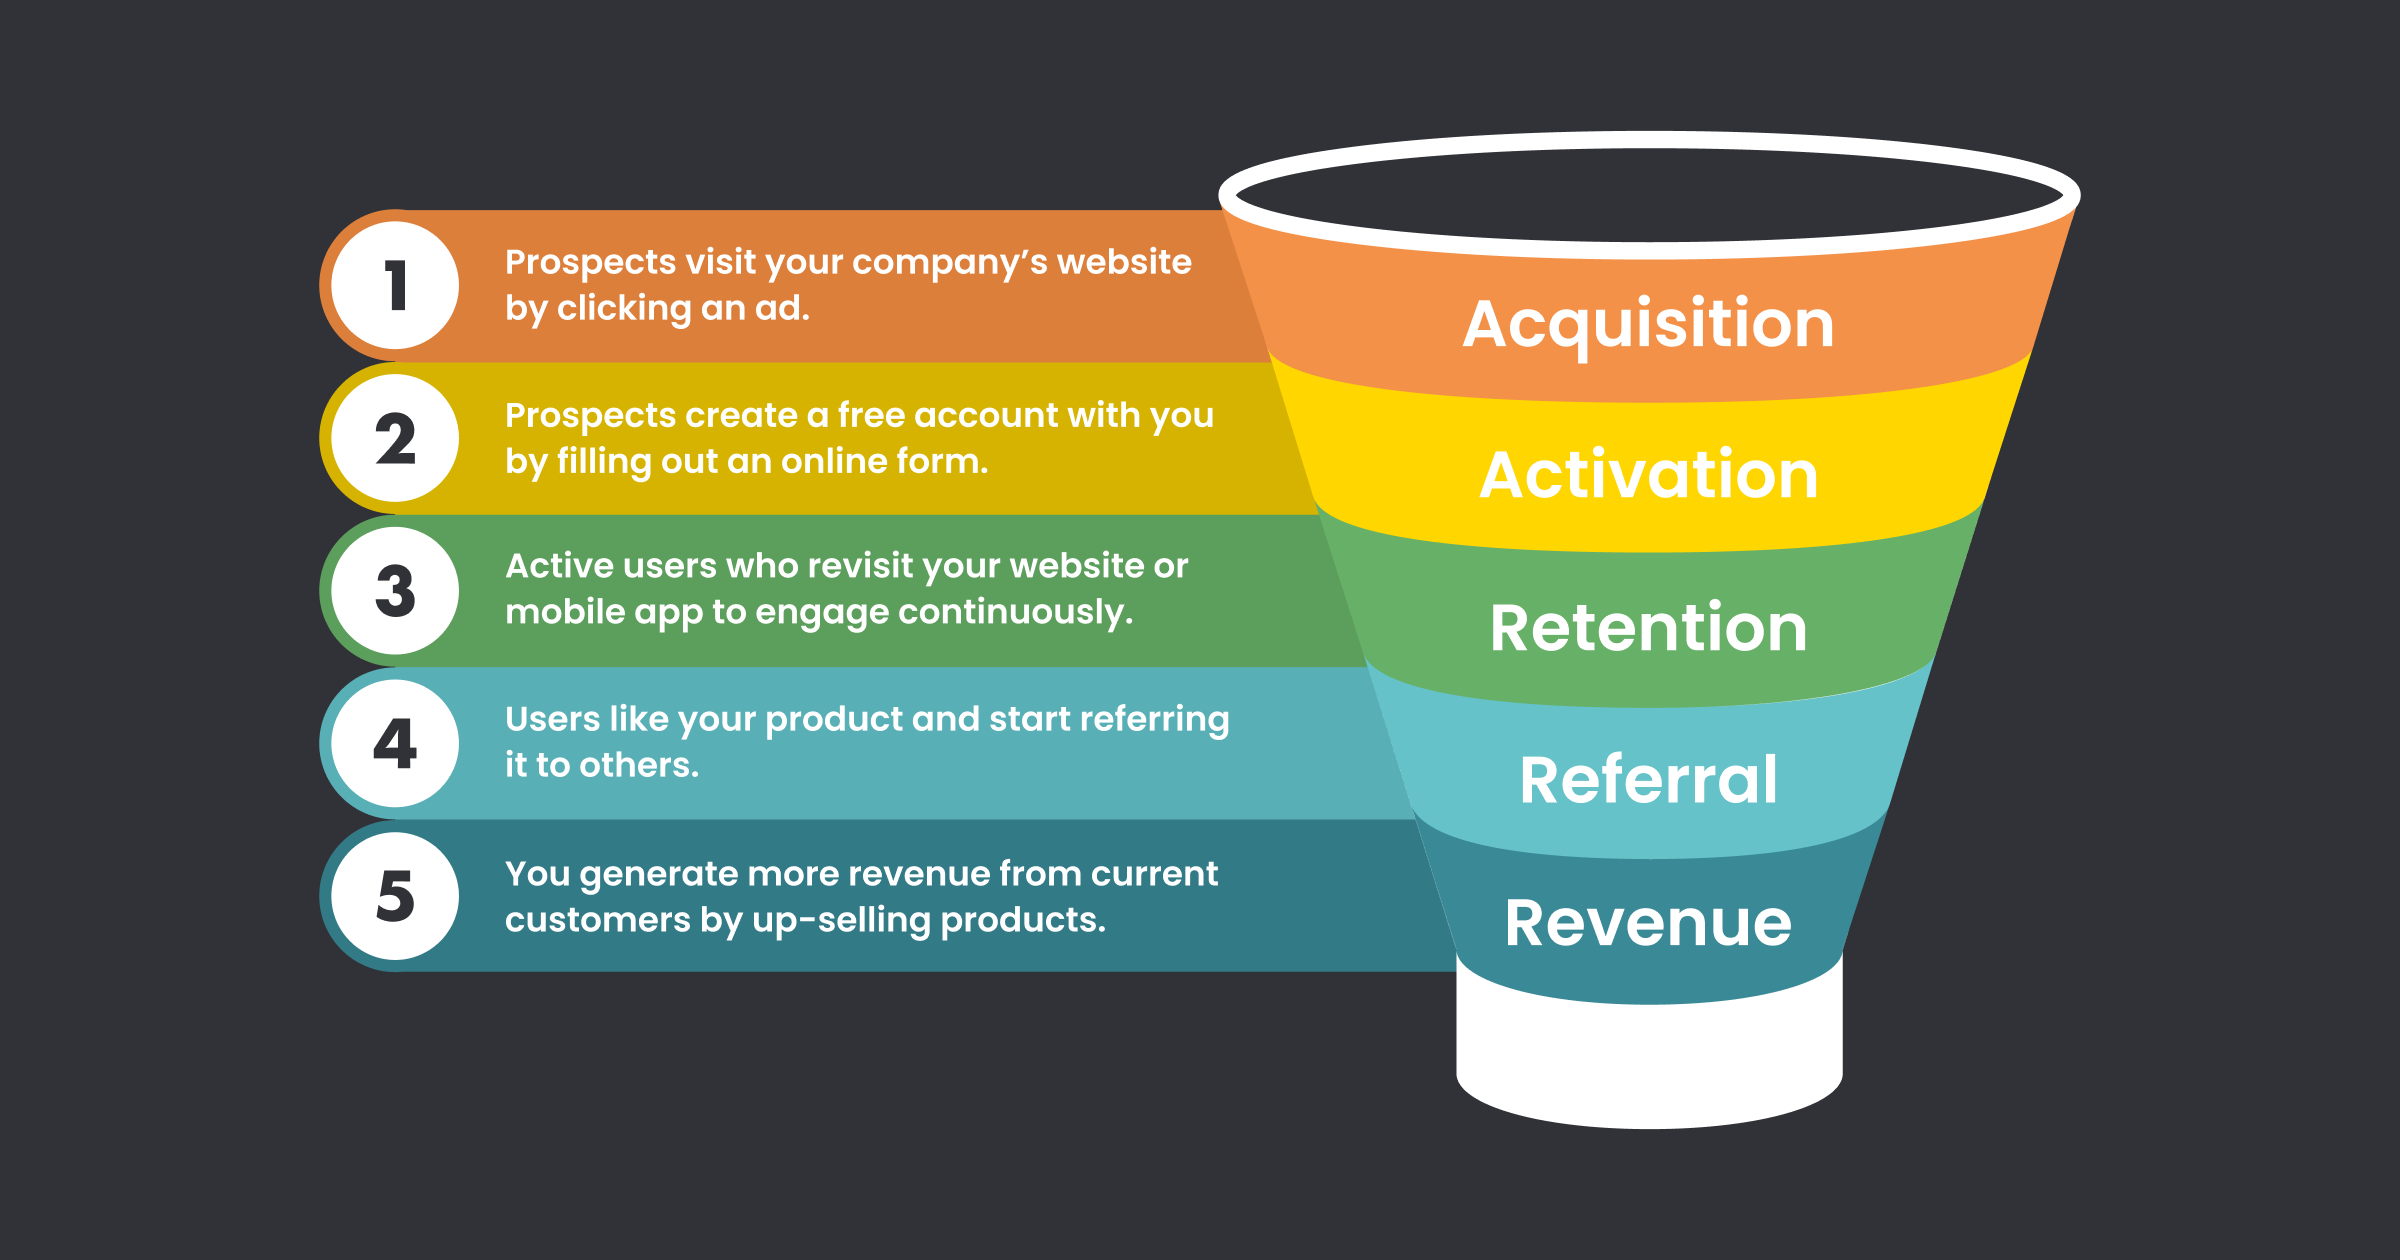 More about funnel analytics for a broking firm